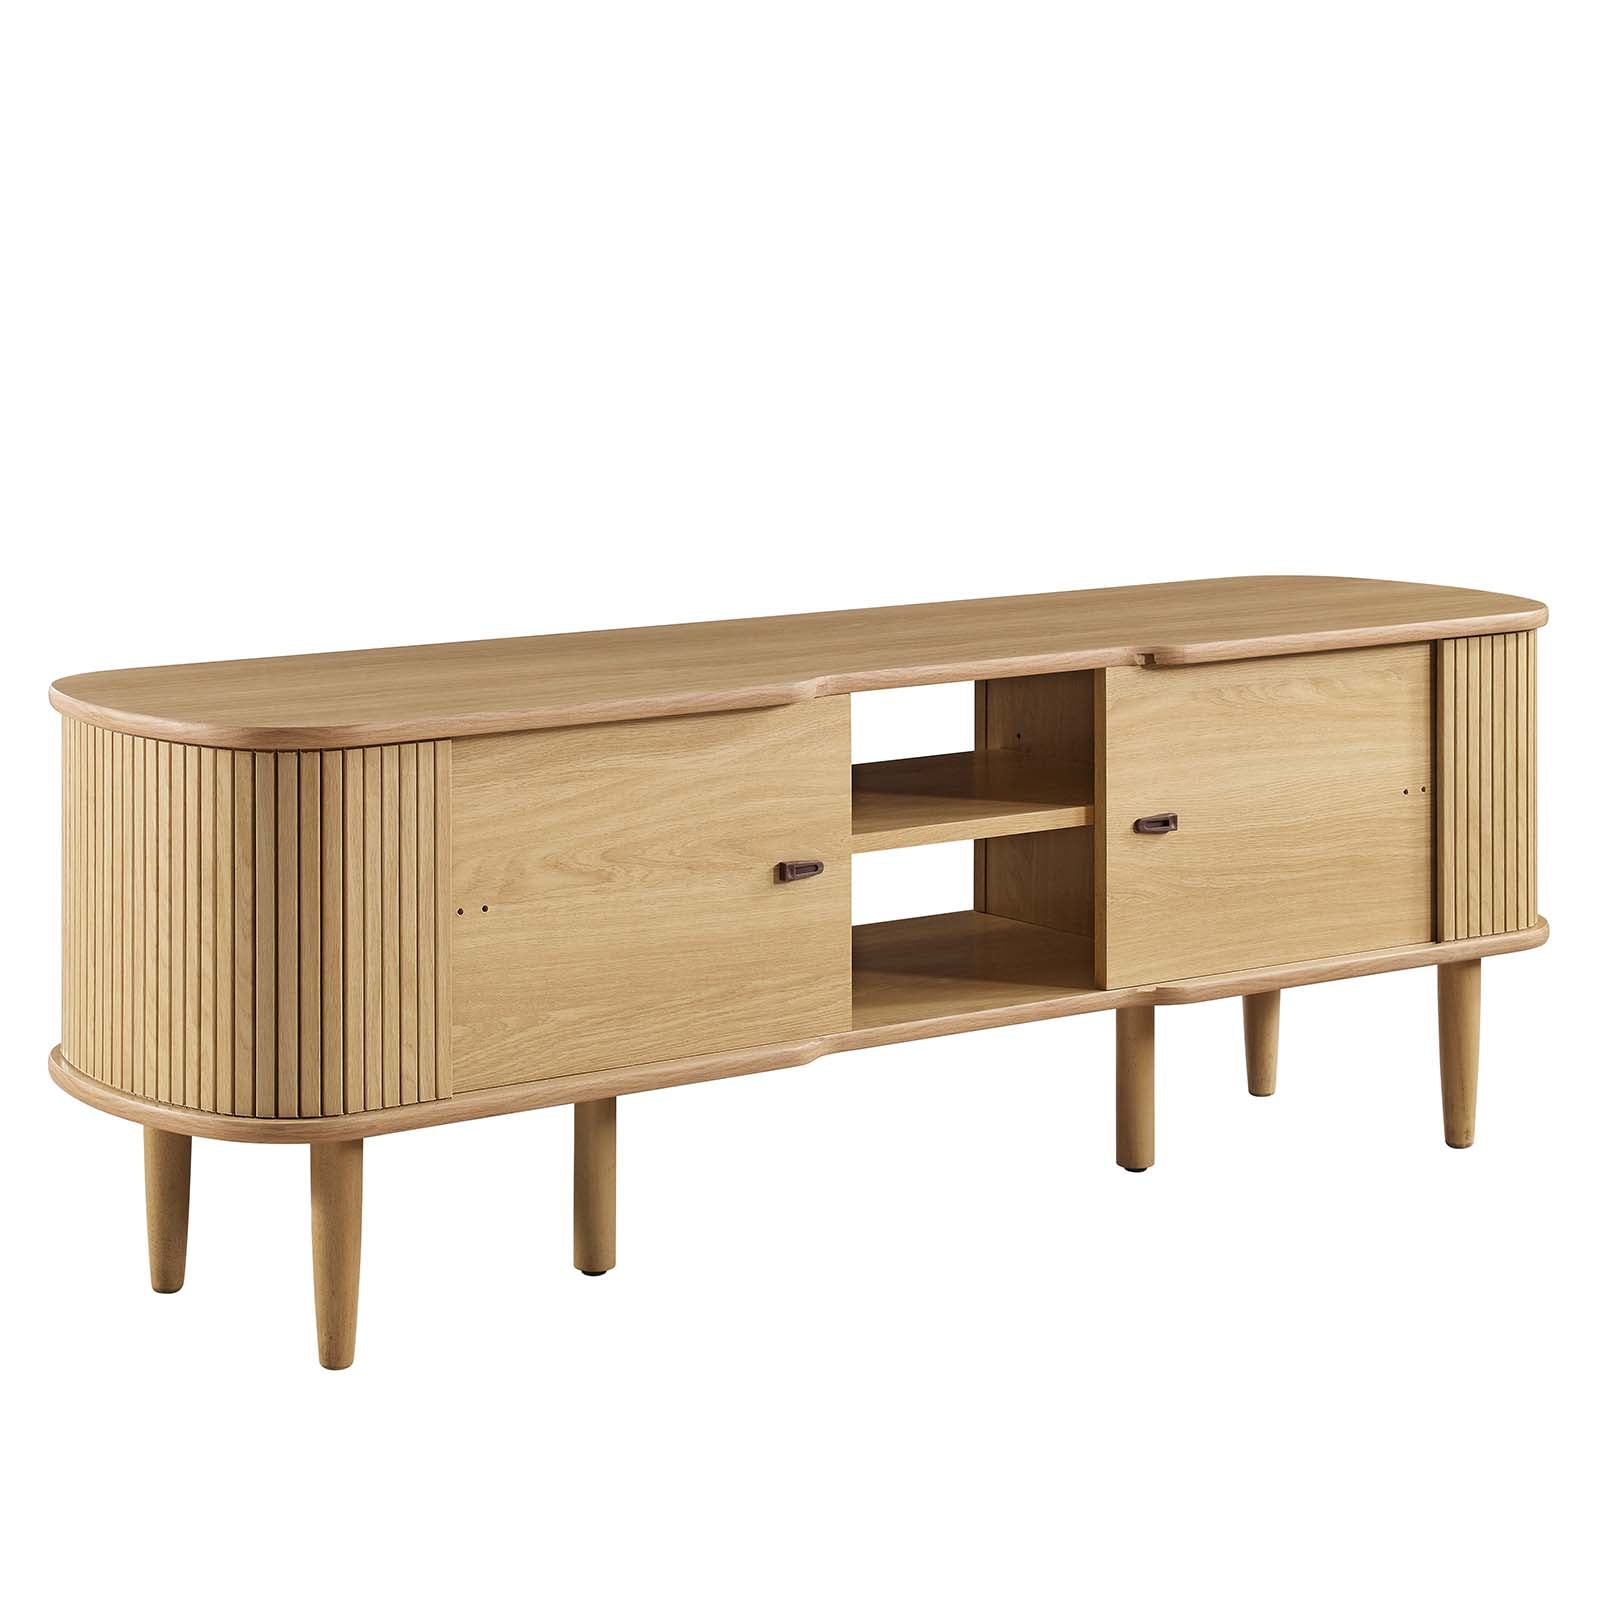 Contour 55" TV Stand - East Shore Modern Home Furnishings